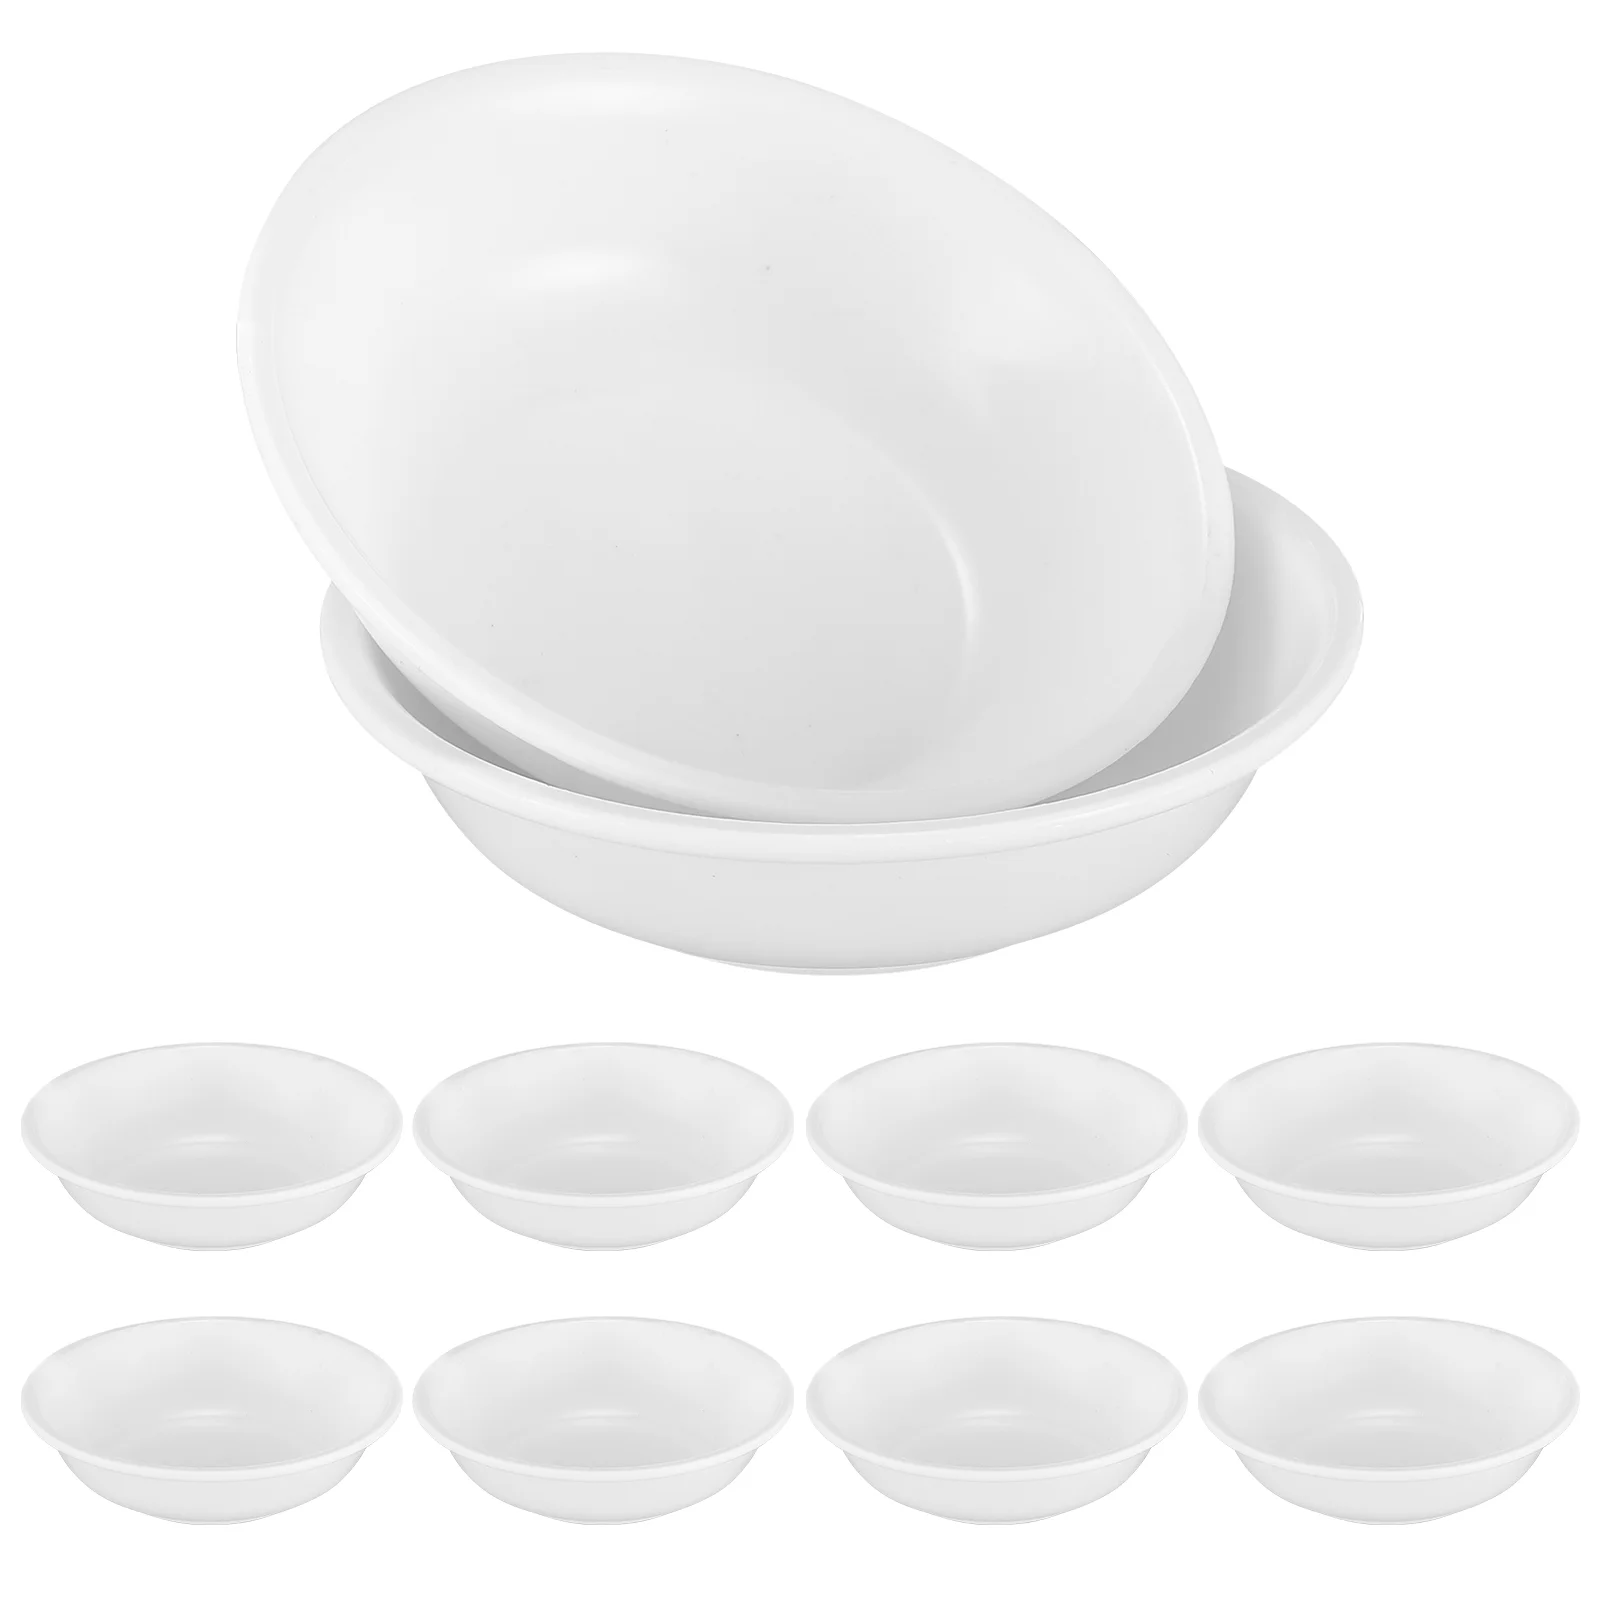 

Bowls Sauce Dipping Dishes Cups Dish Seasoning Appetizer Soy Pinch Condiment Bowl Prep Mini Plastic Shaped Salsa Tray Holder Oil